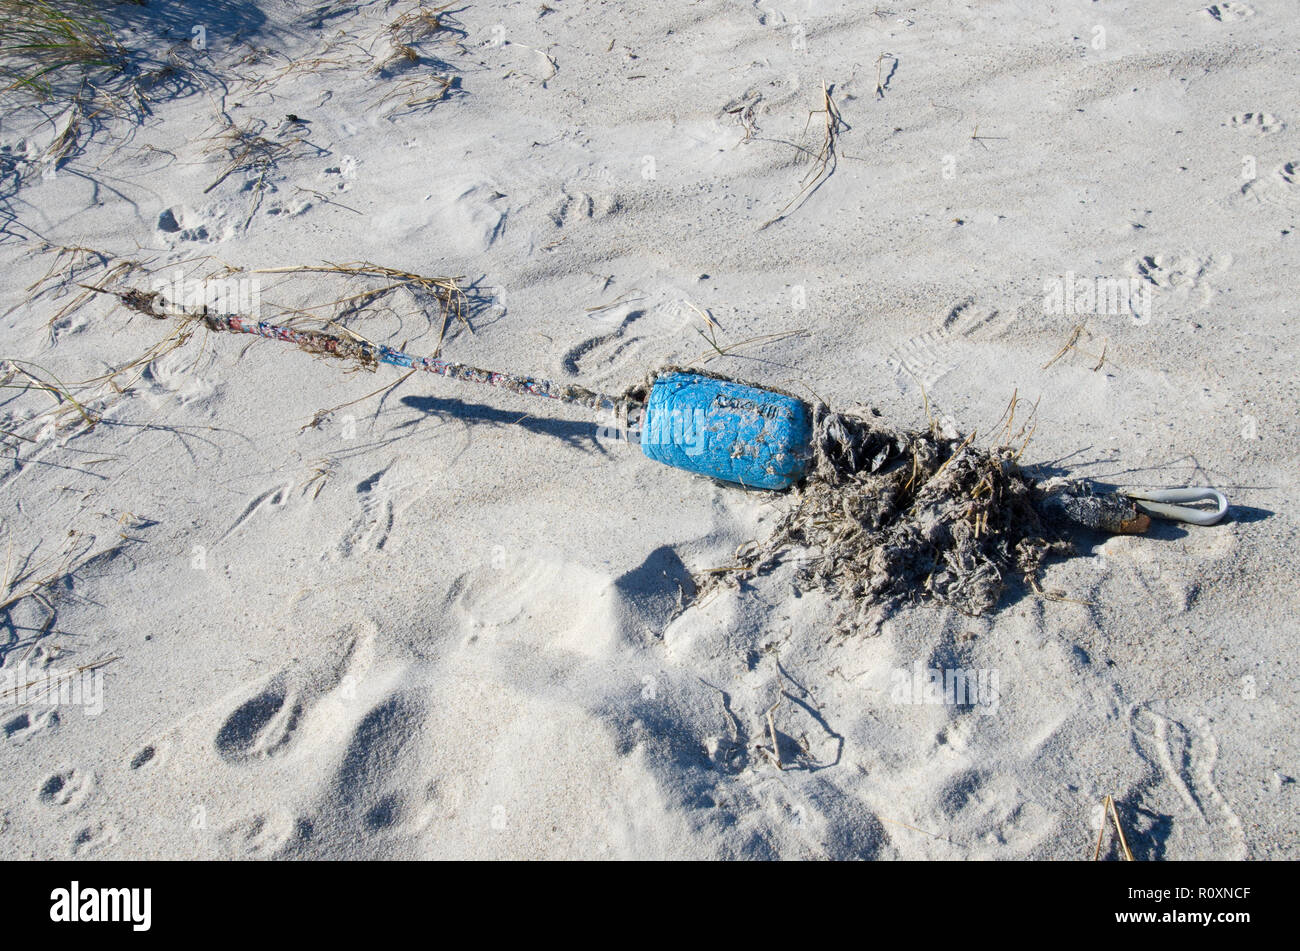 Blue lobster pot buoy with wood pole and rope washed ashore in the sand on Skaket Beach, Orleans, Cape Cod, Massachusetts, USA Stock Photo